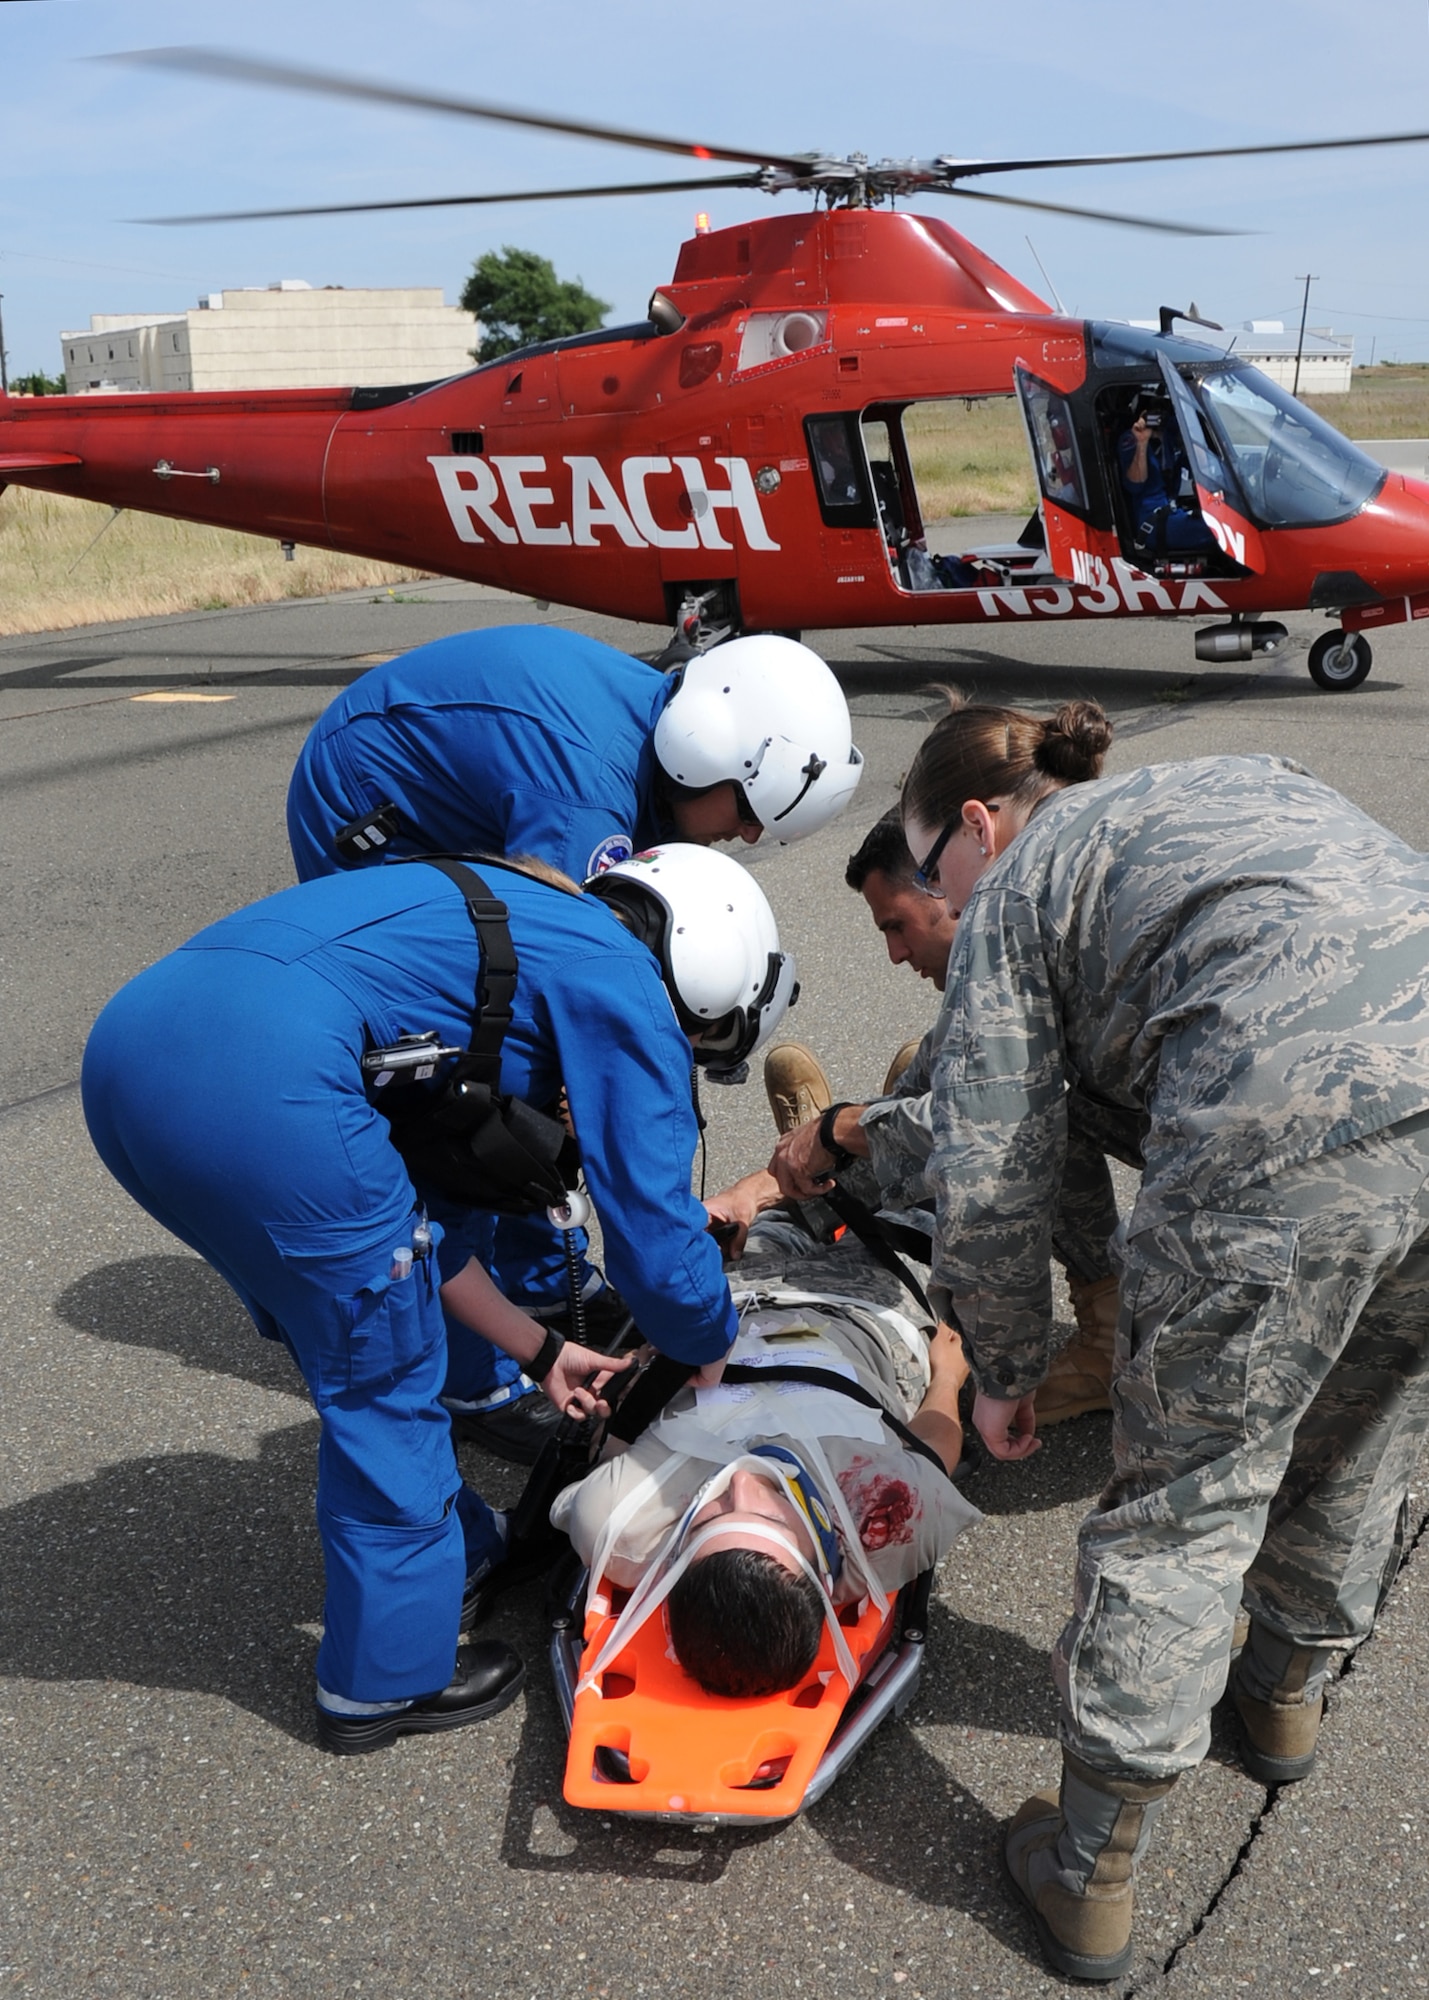 During an emergency response exercise at Travis Air Force Base on 12 May 2010 a local civilian air ambulance and military medical personal work together to transport a simulated patient.  (U.S. Air Force photo by Civ/Jay Trottier)